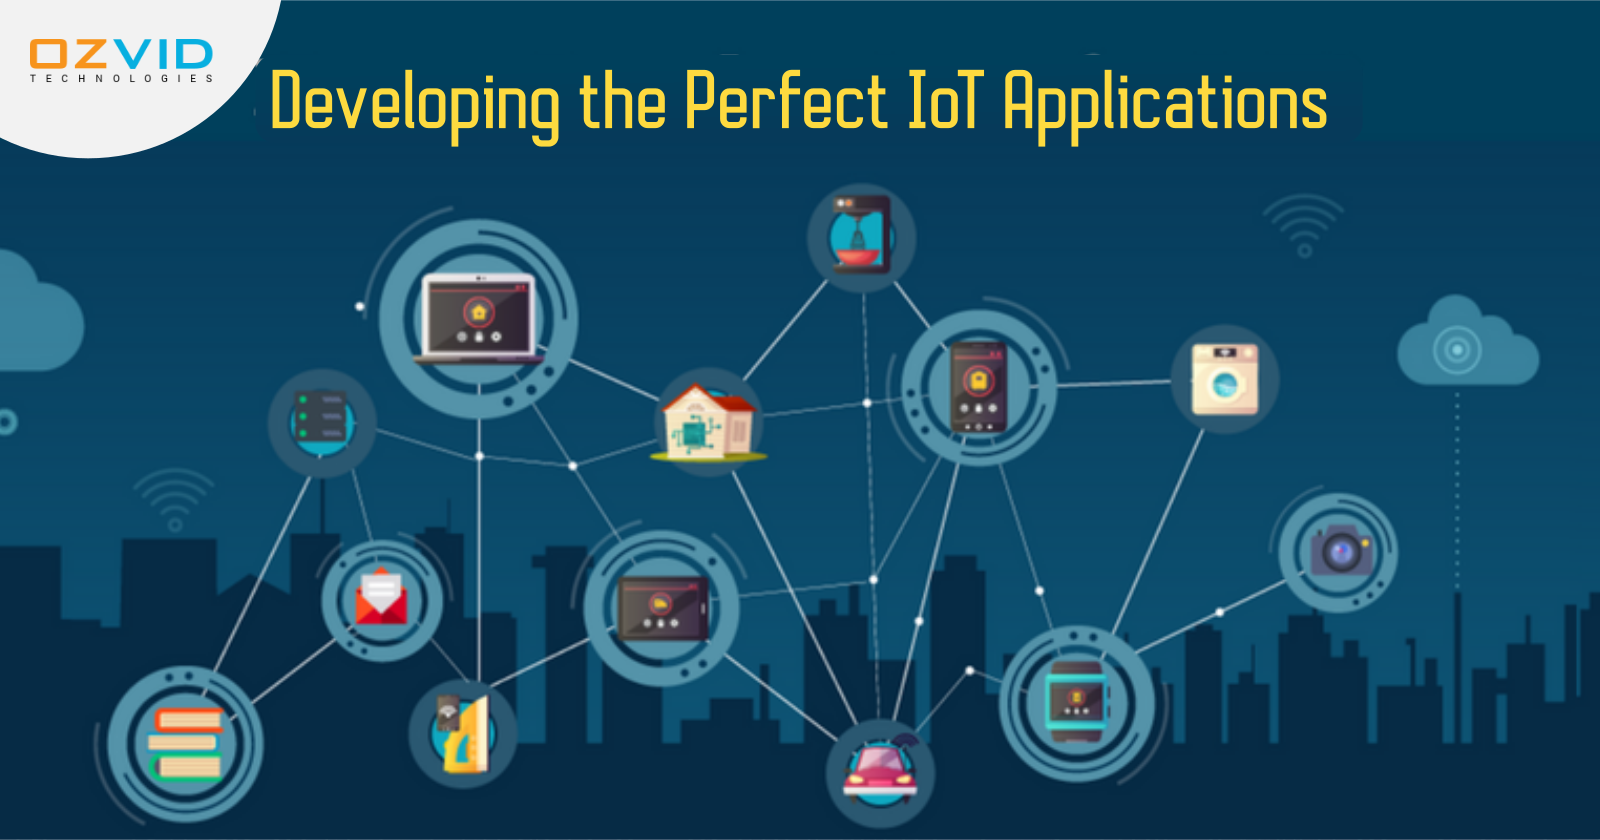 Planning to Develop an IoT Application? Go Through These Questions First!